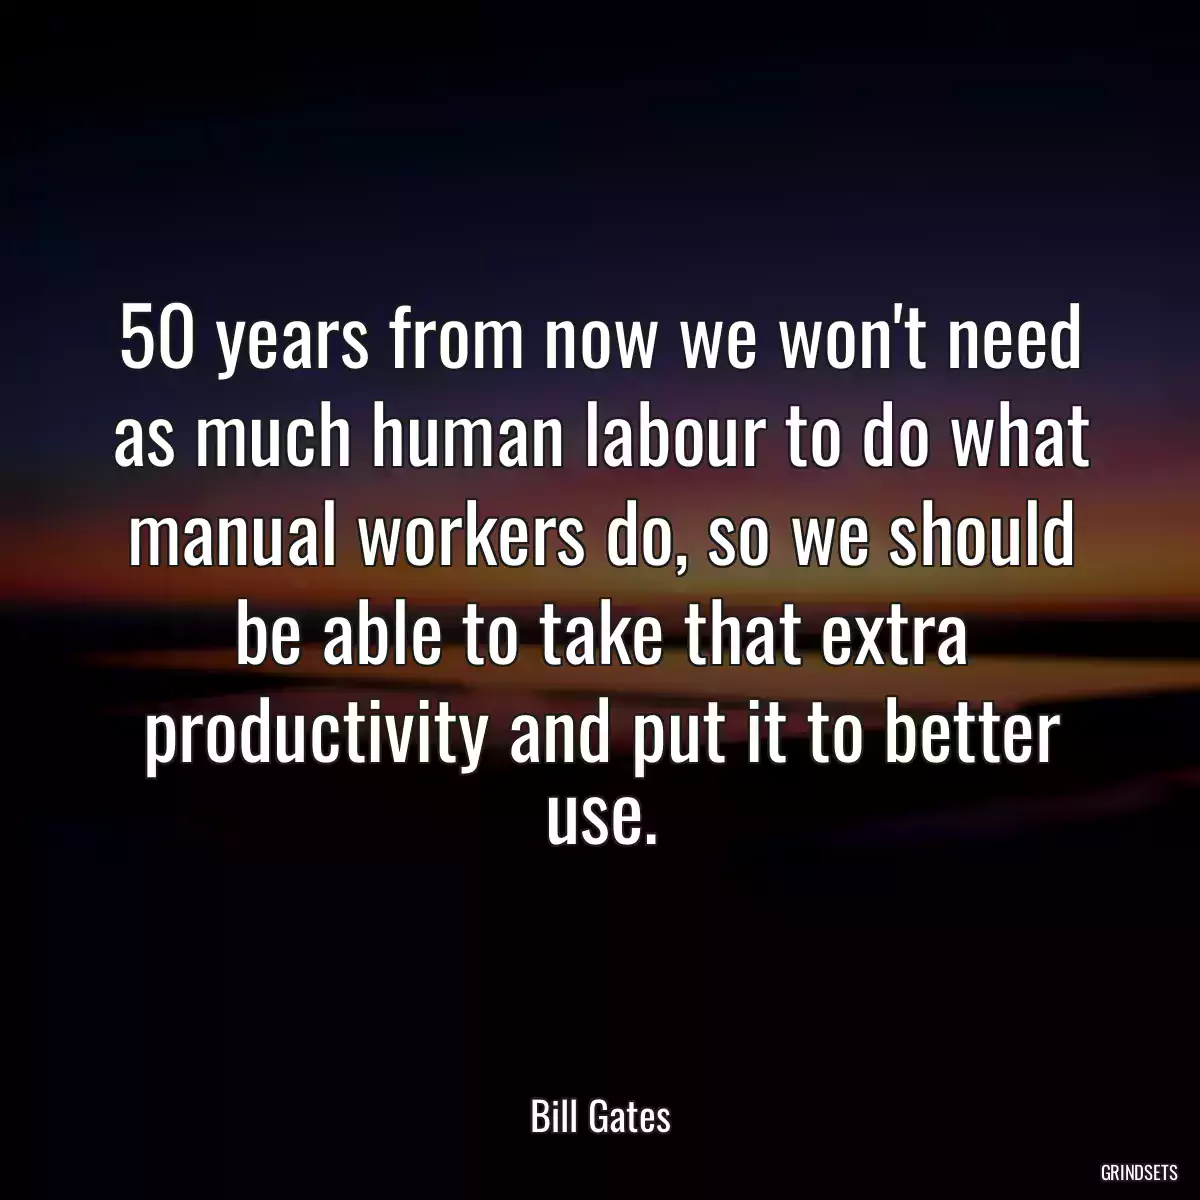 50 years from now we won\'t need as much human labour to do what manual workers do, so we should be able to take that extra productivity and put it to better use.